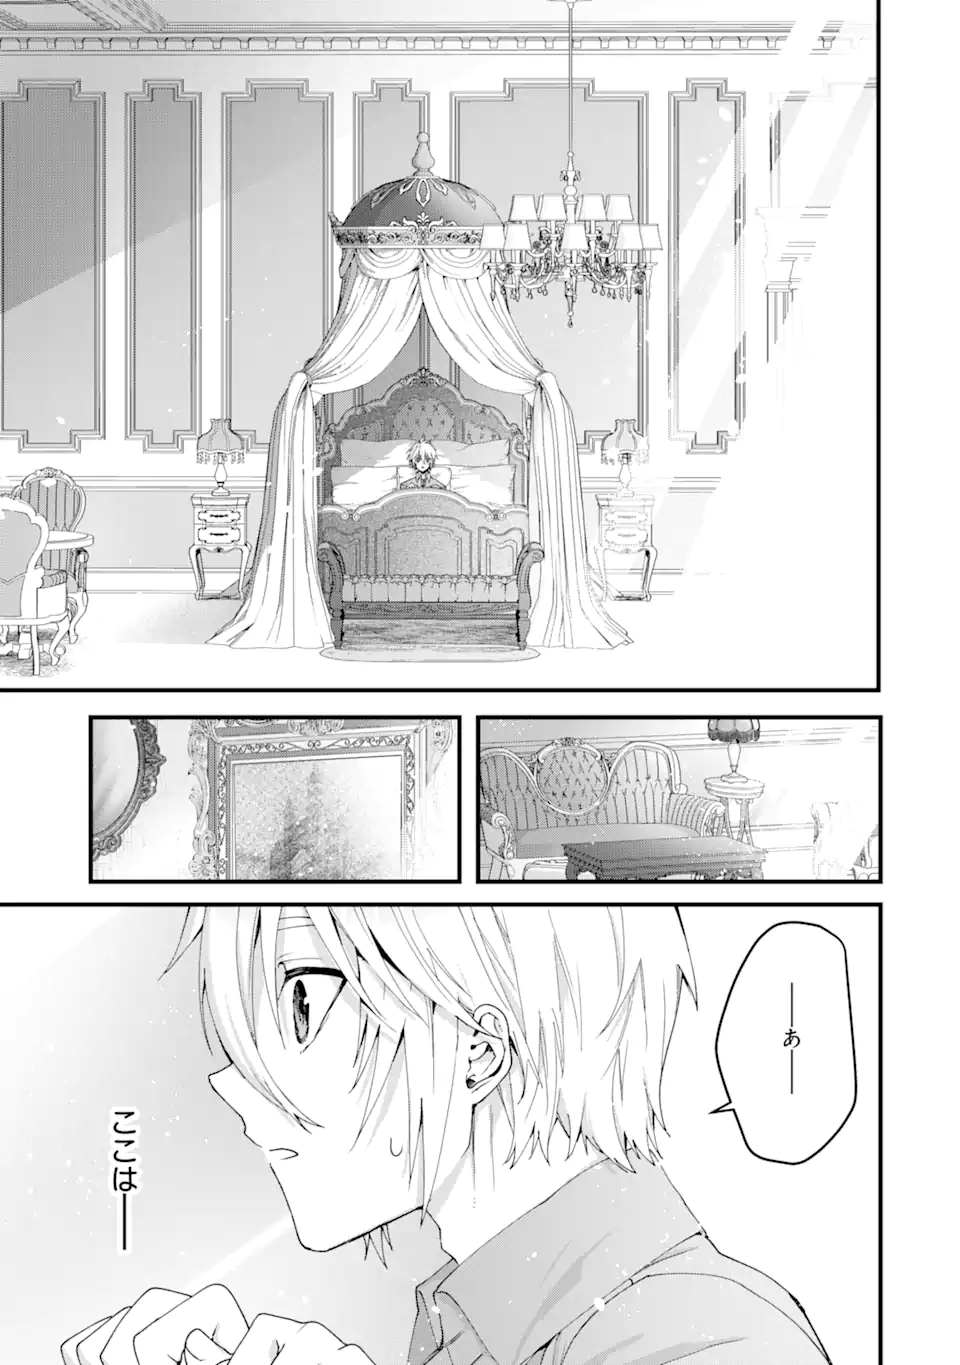 Ousama no Propose - Chapter 14.3 - Page 2